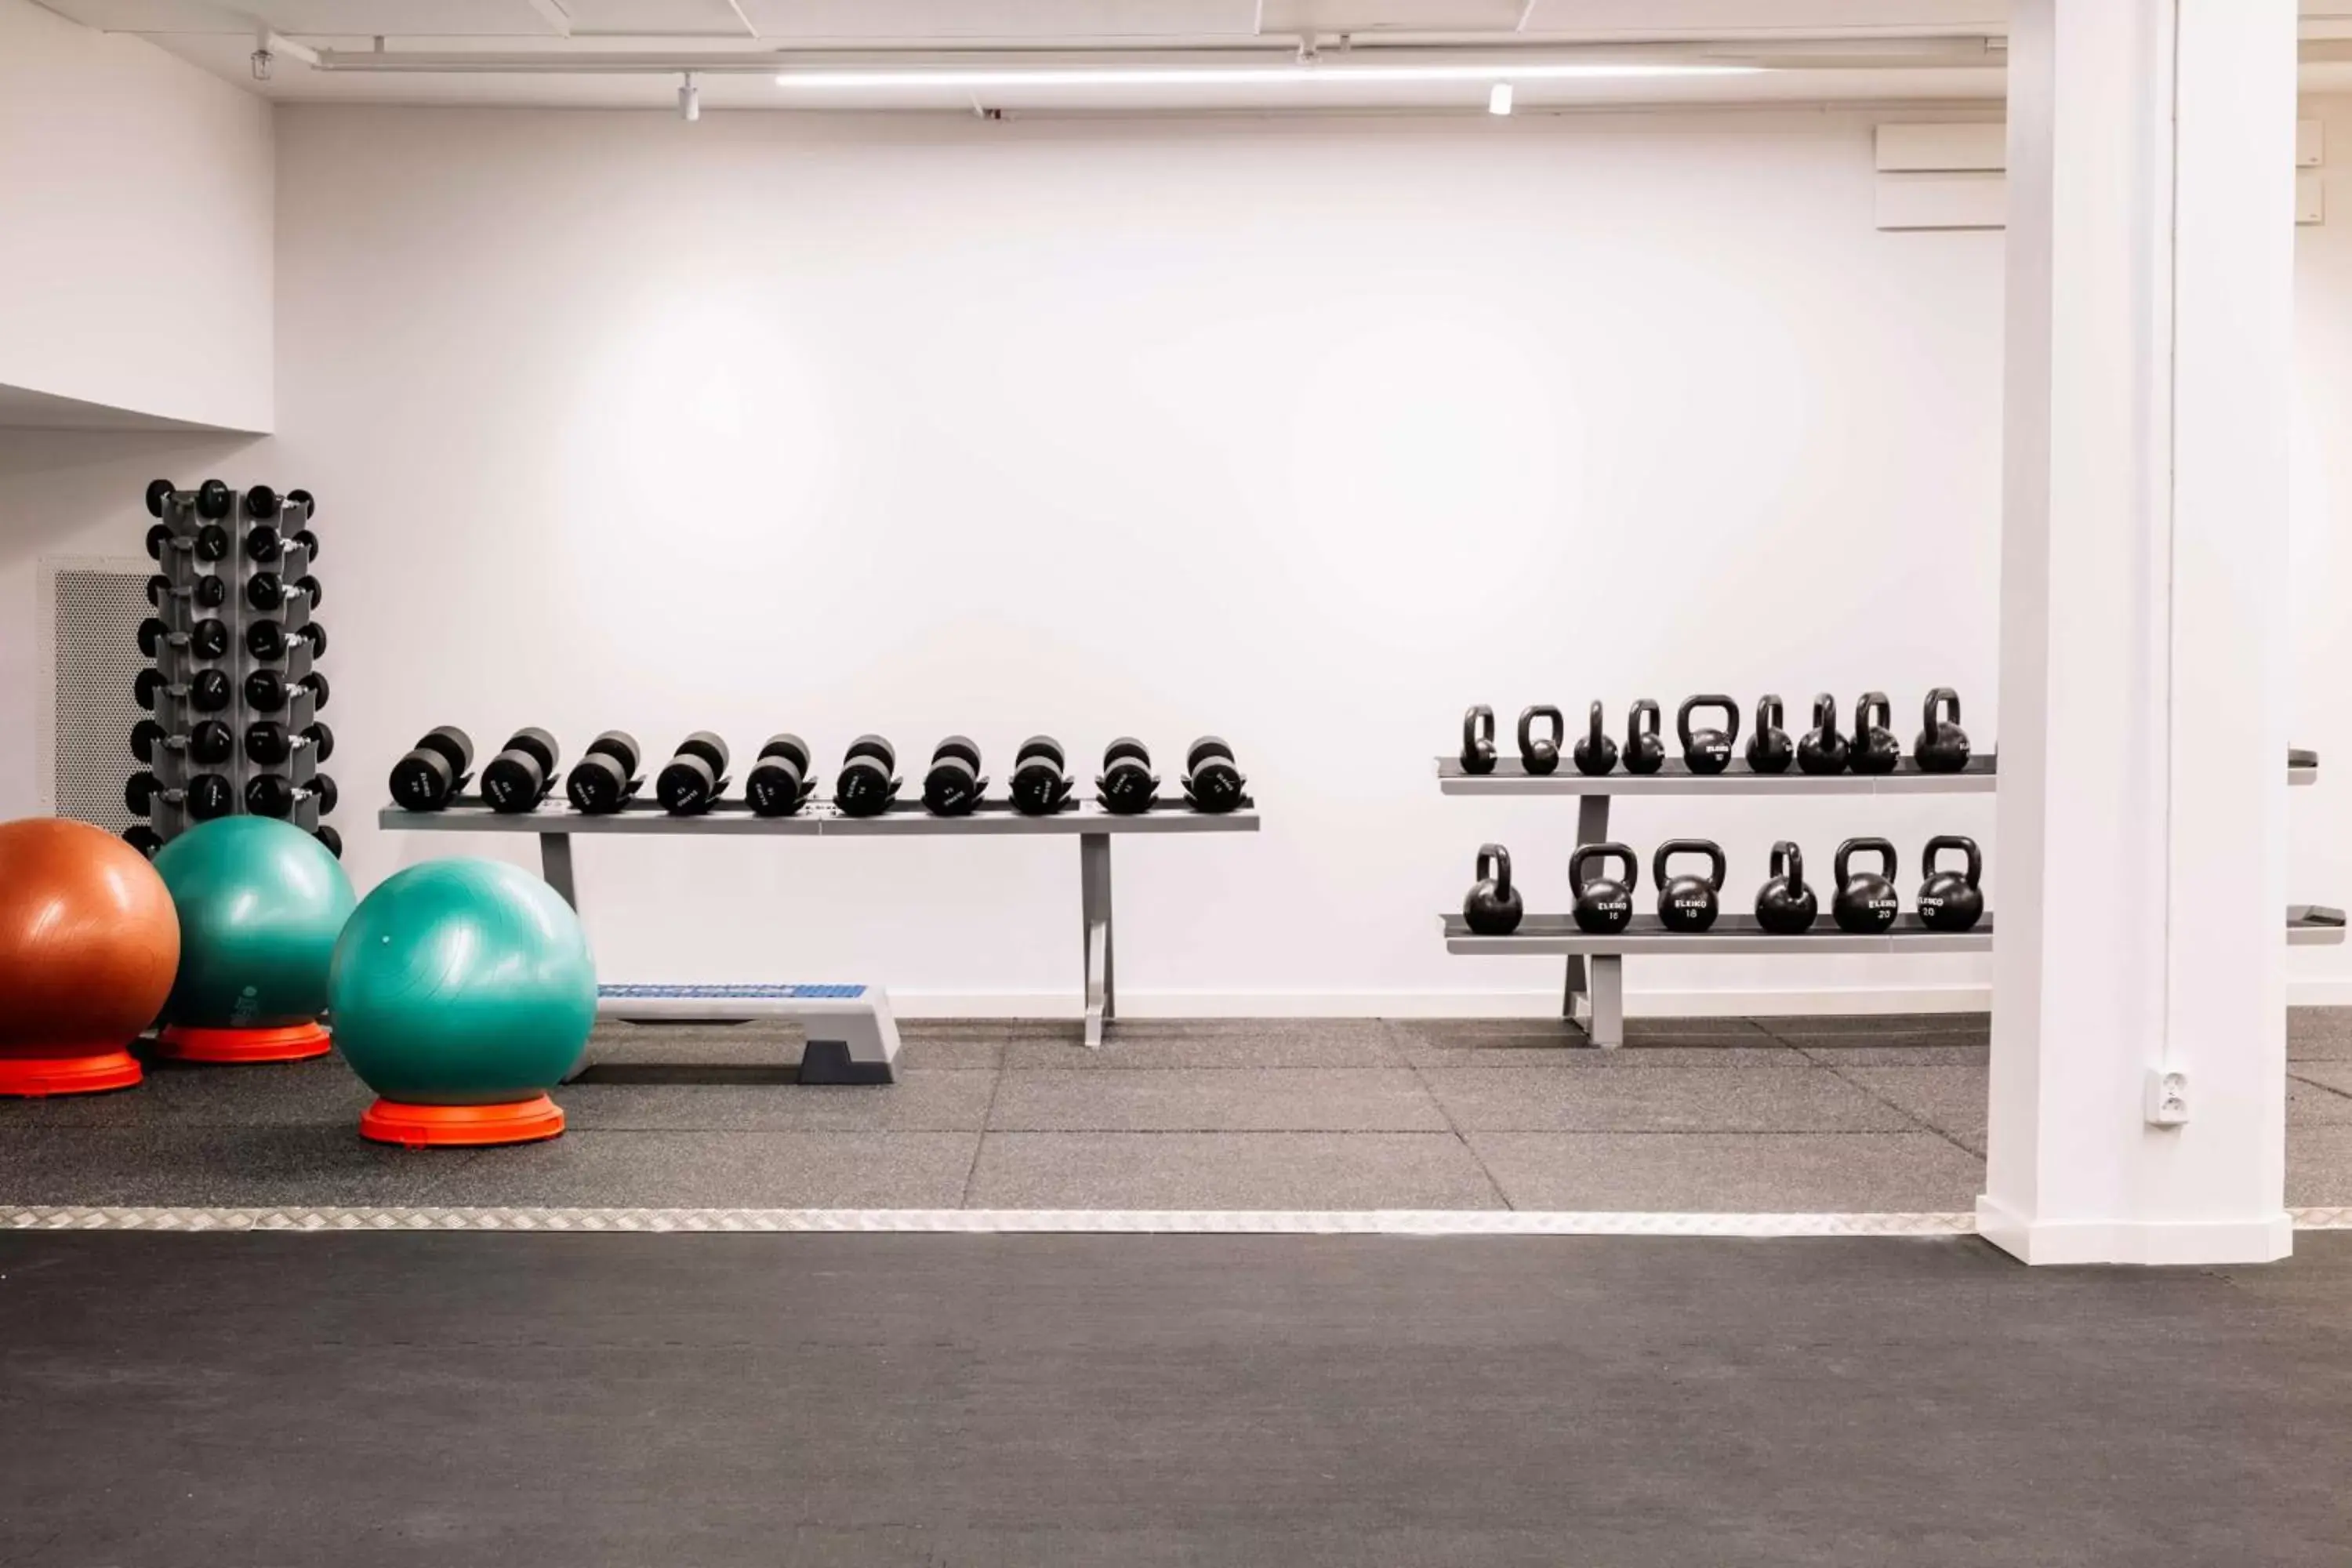 Fitness centre/facilities, Fitness Center/Facilities in Best Western Kom Hotel Stockholm